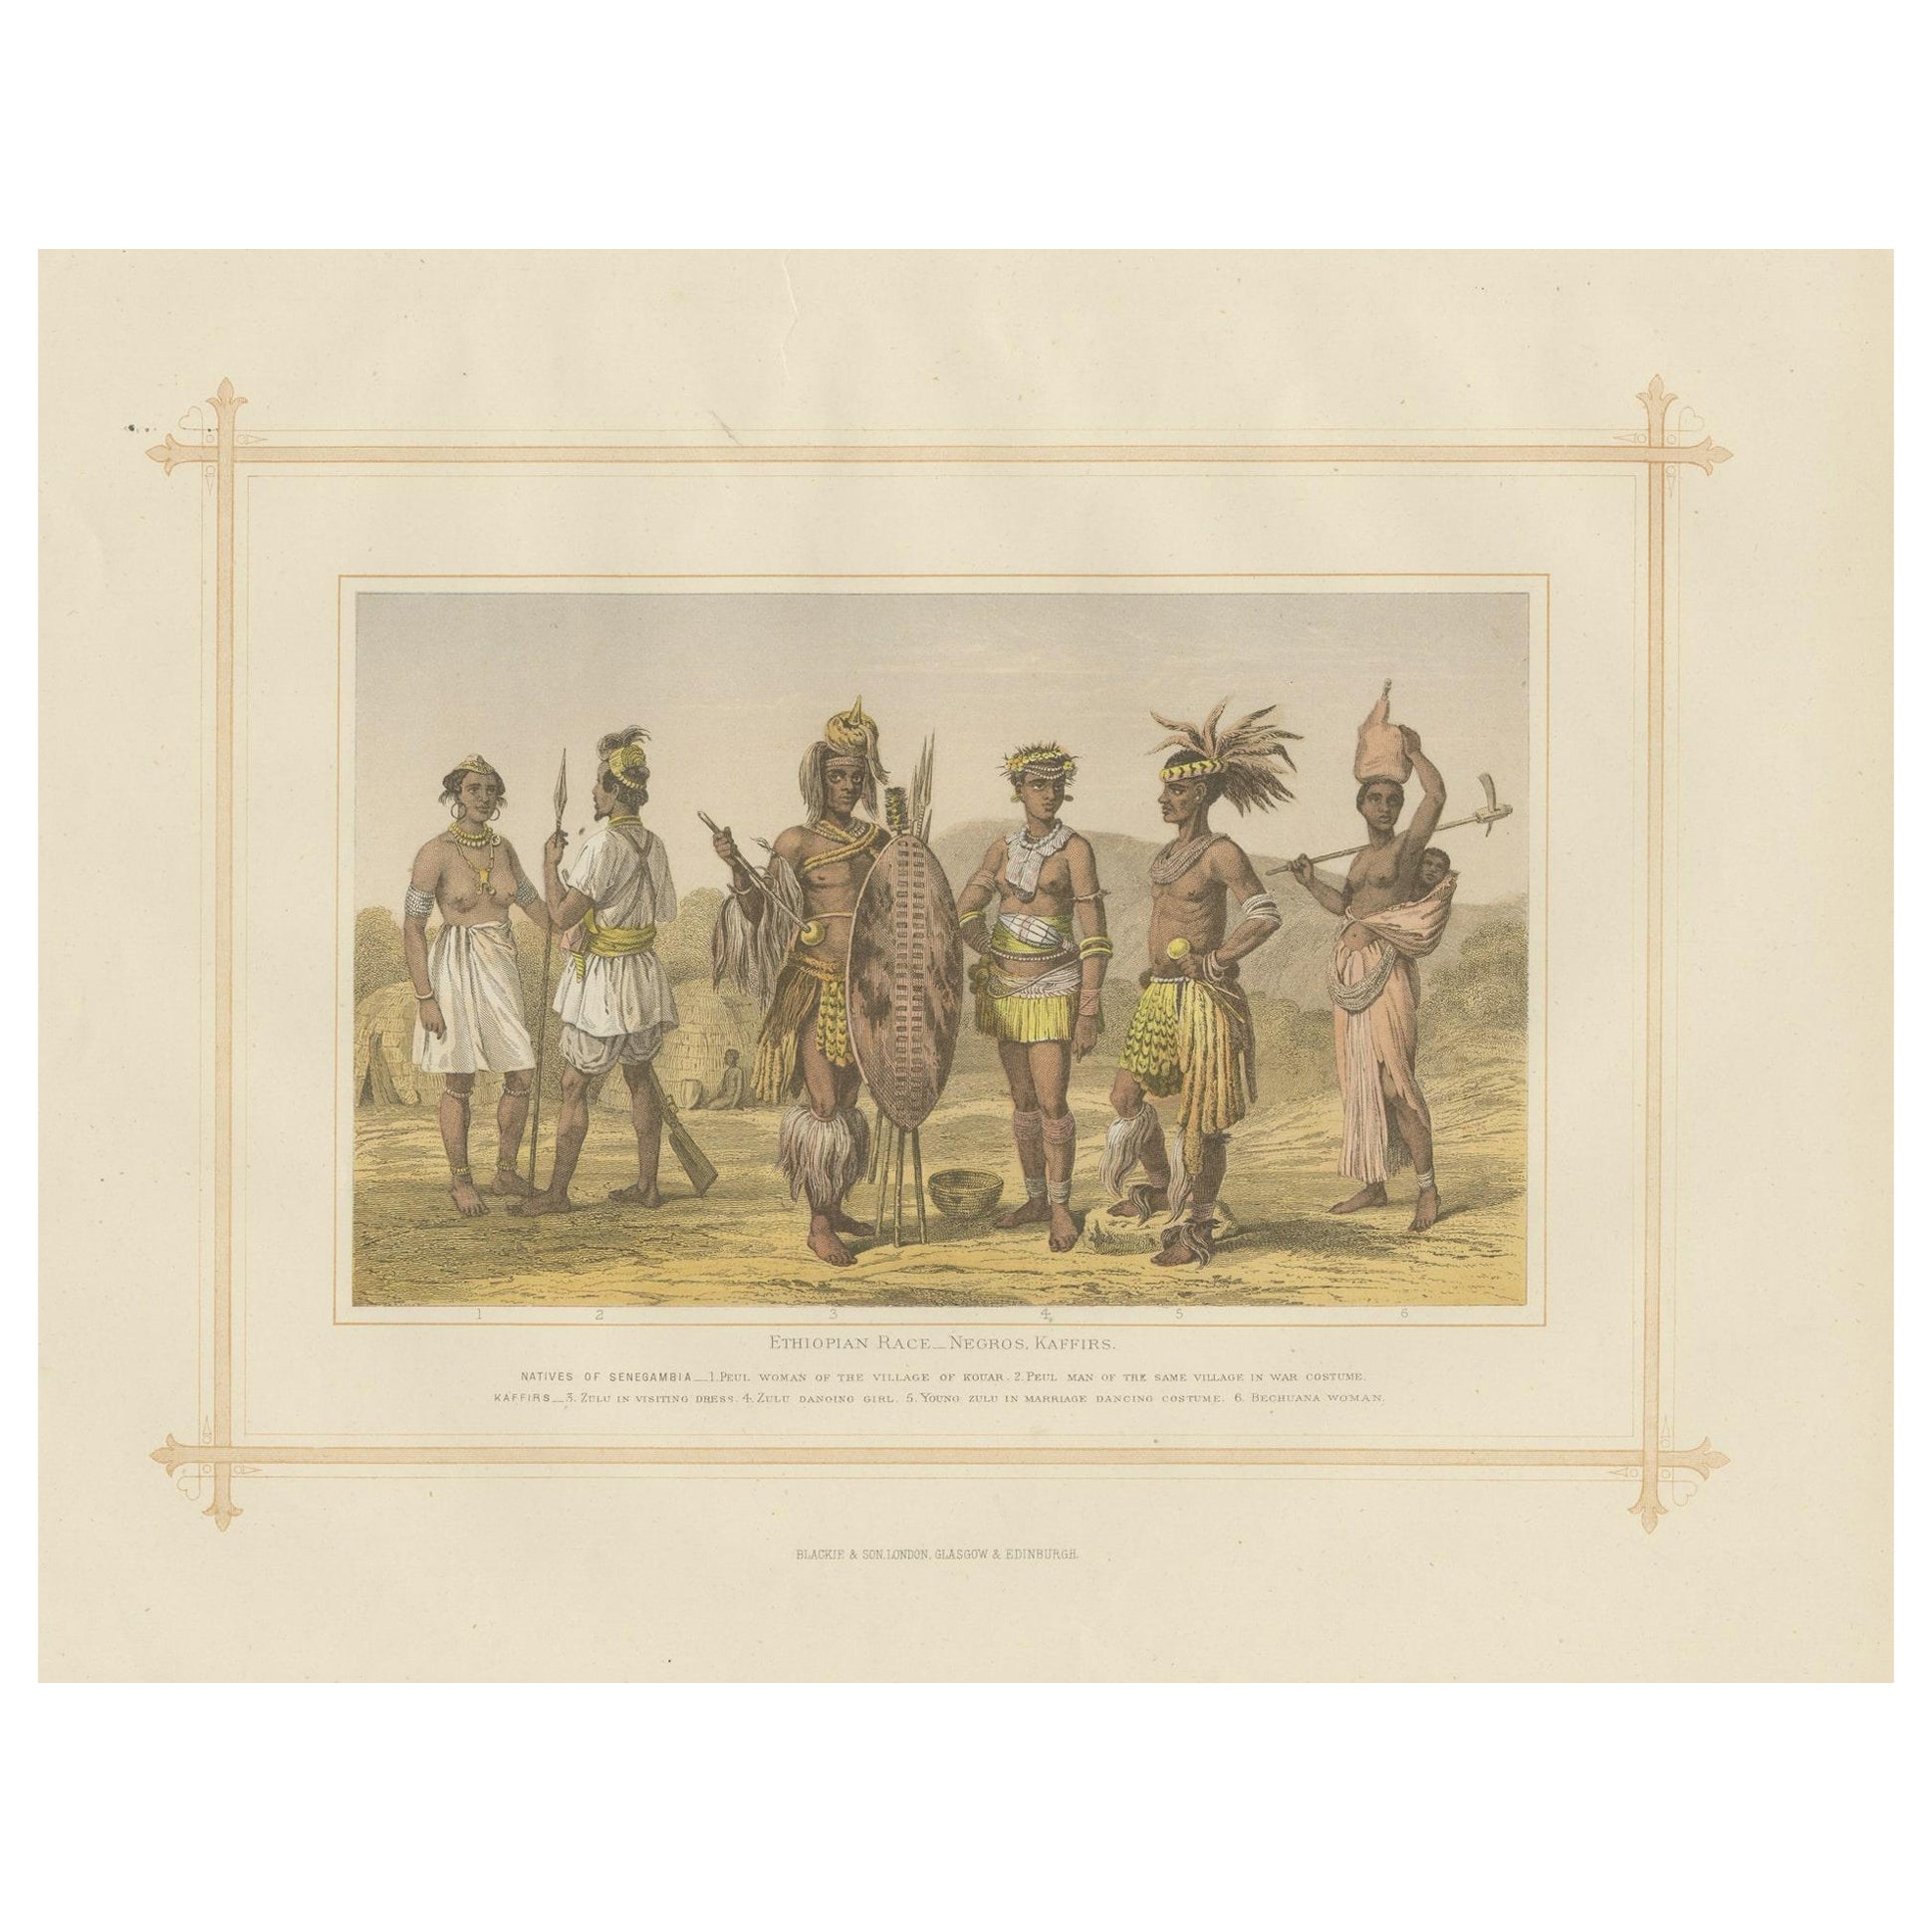 Antique Lithograph of the Ethiopian Race - Negros, Kaffirs, 1882 For Sale